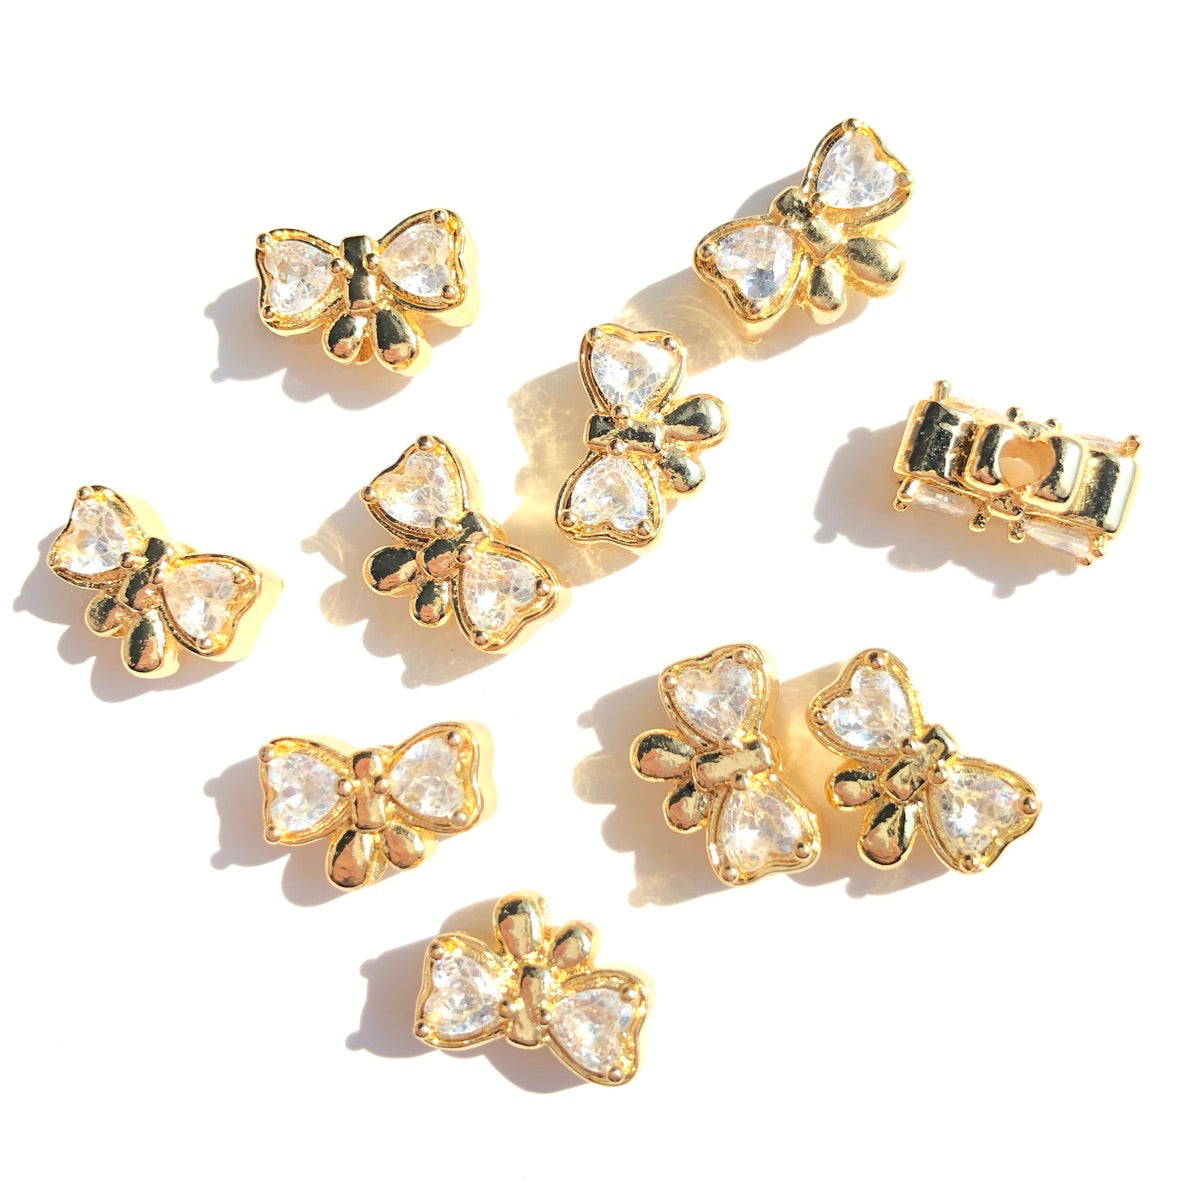 10-20-50pcs/lot Heart CZ Paved Bow Tie Spacers Gold CZ Paved Spacers Big Hole Beads New Spacers Arrivals Rondelle Beads Wholesale Charms Beads Beyond